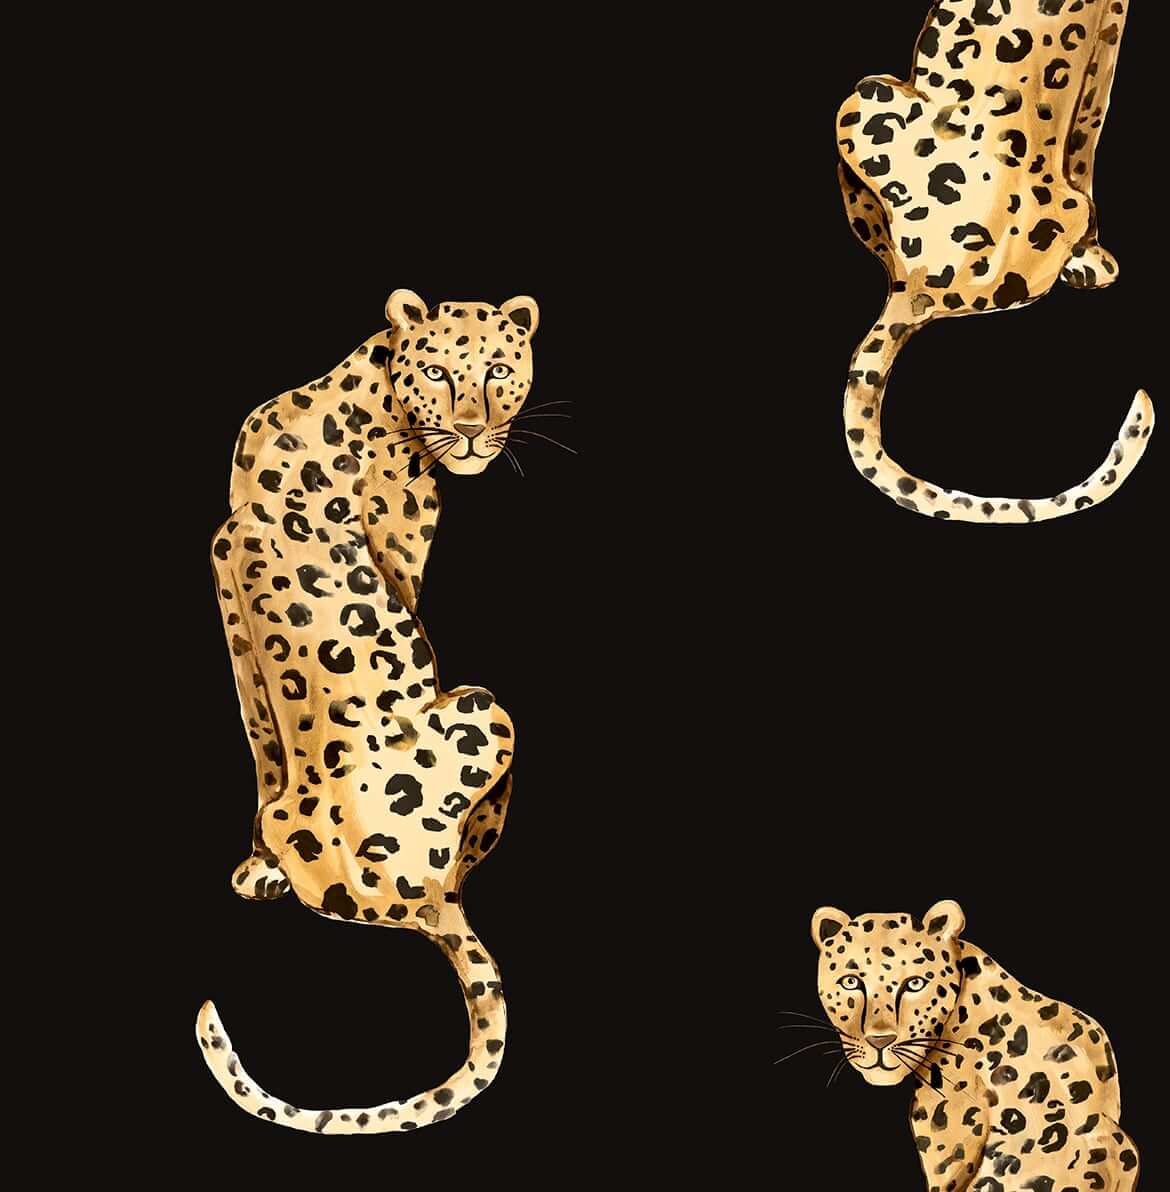 Sample of Lady Leopard Wallpaper in Authentic Brown and Black